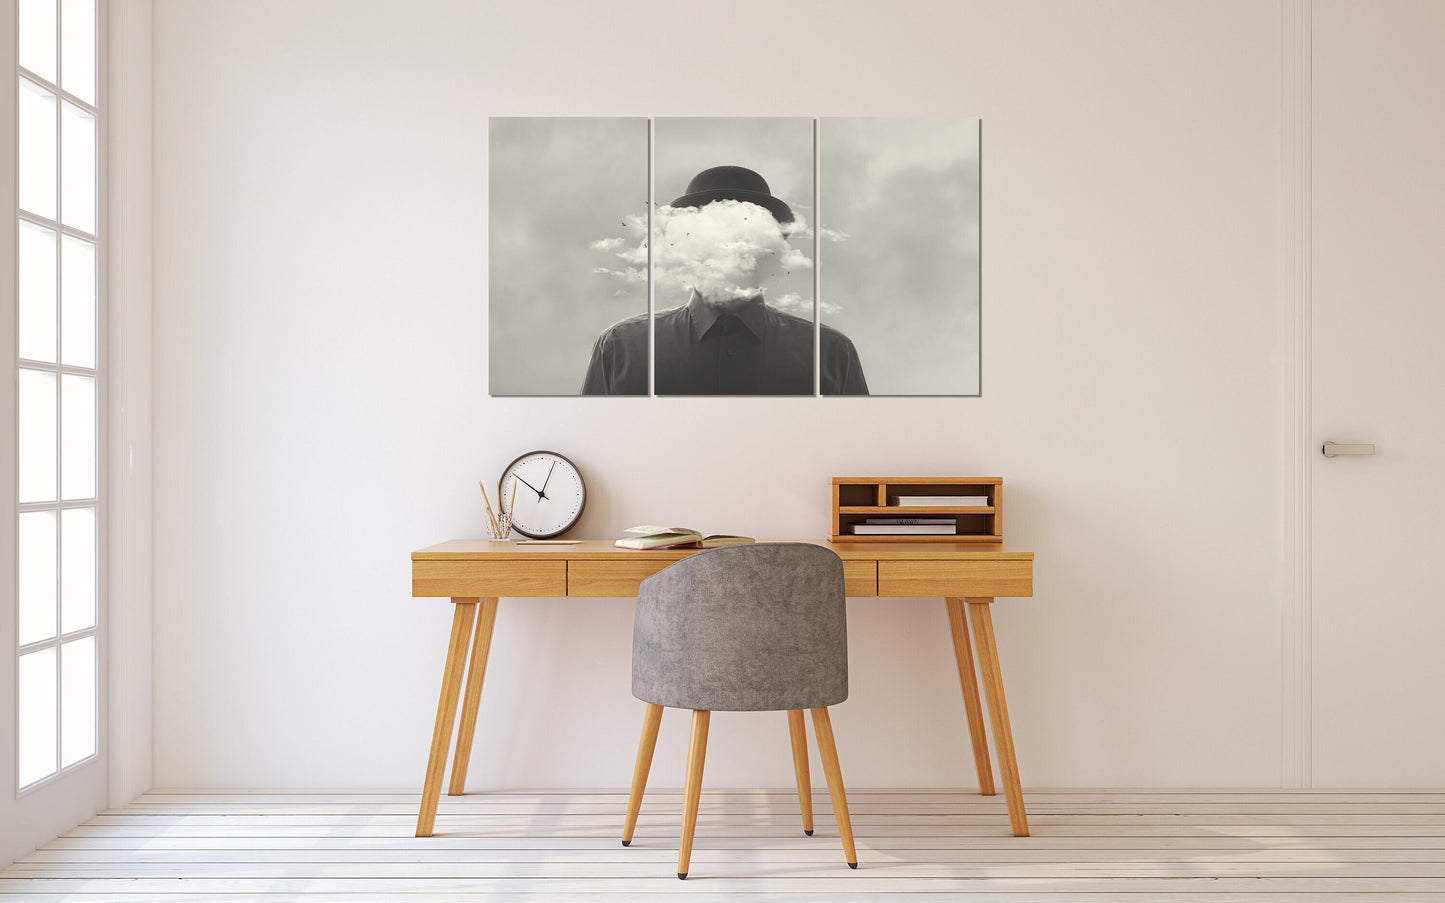 Surreal wall art, surreal painting, black and white canvas wall art, cloud painting, surreal art prints, extra large canvas art painting